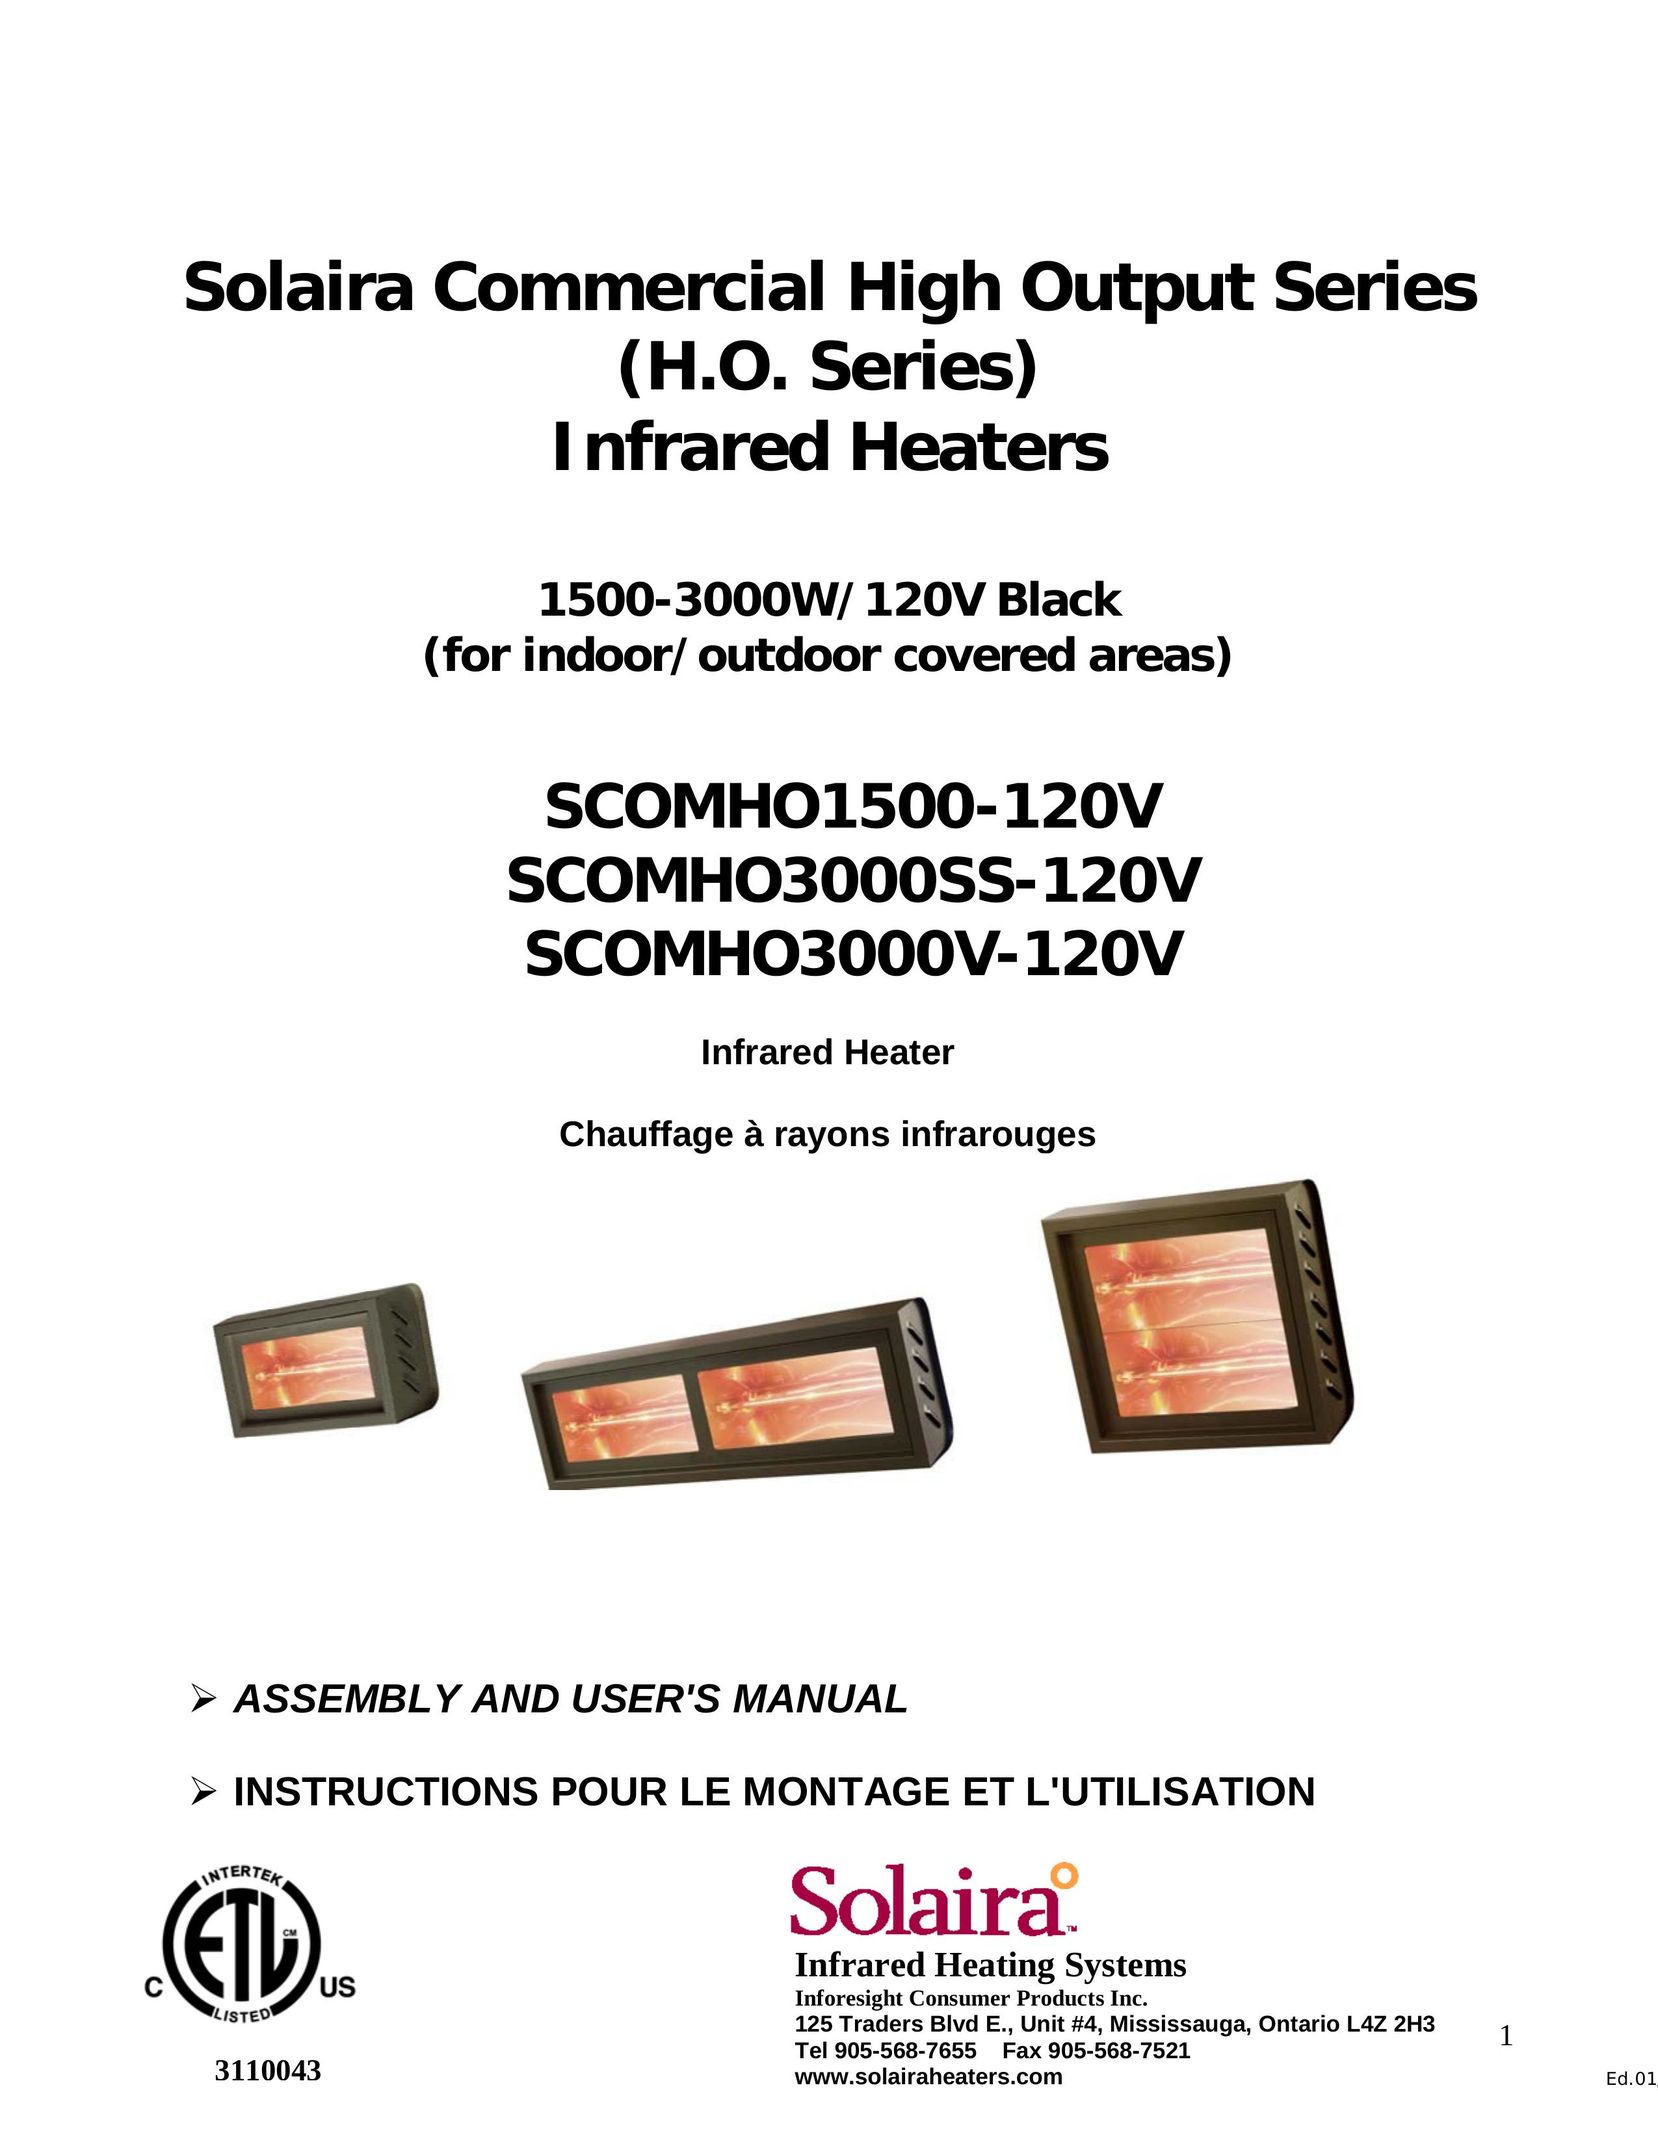 Solaira SCOMH01500 Electric Heater User Manual